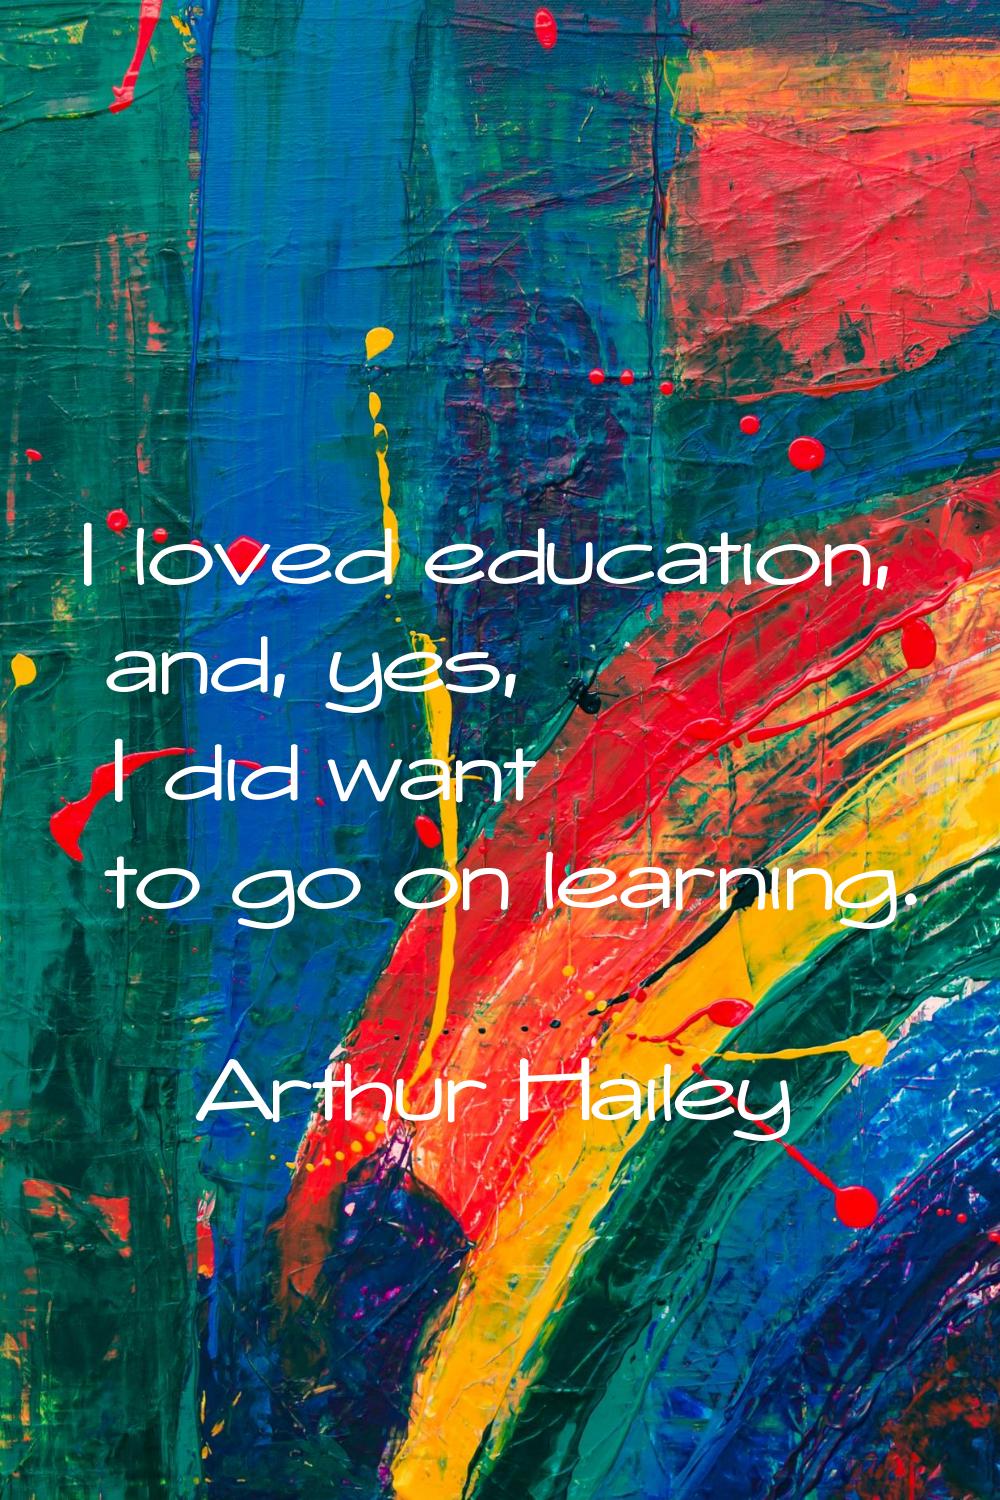 I loved education, and, yes, I did want to go on learning.